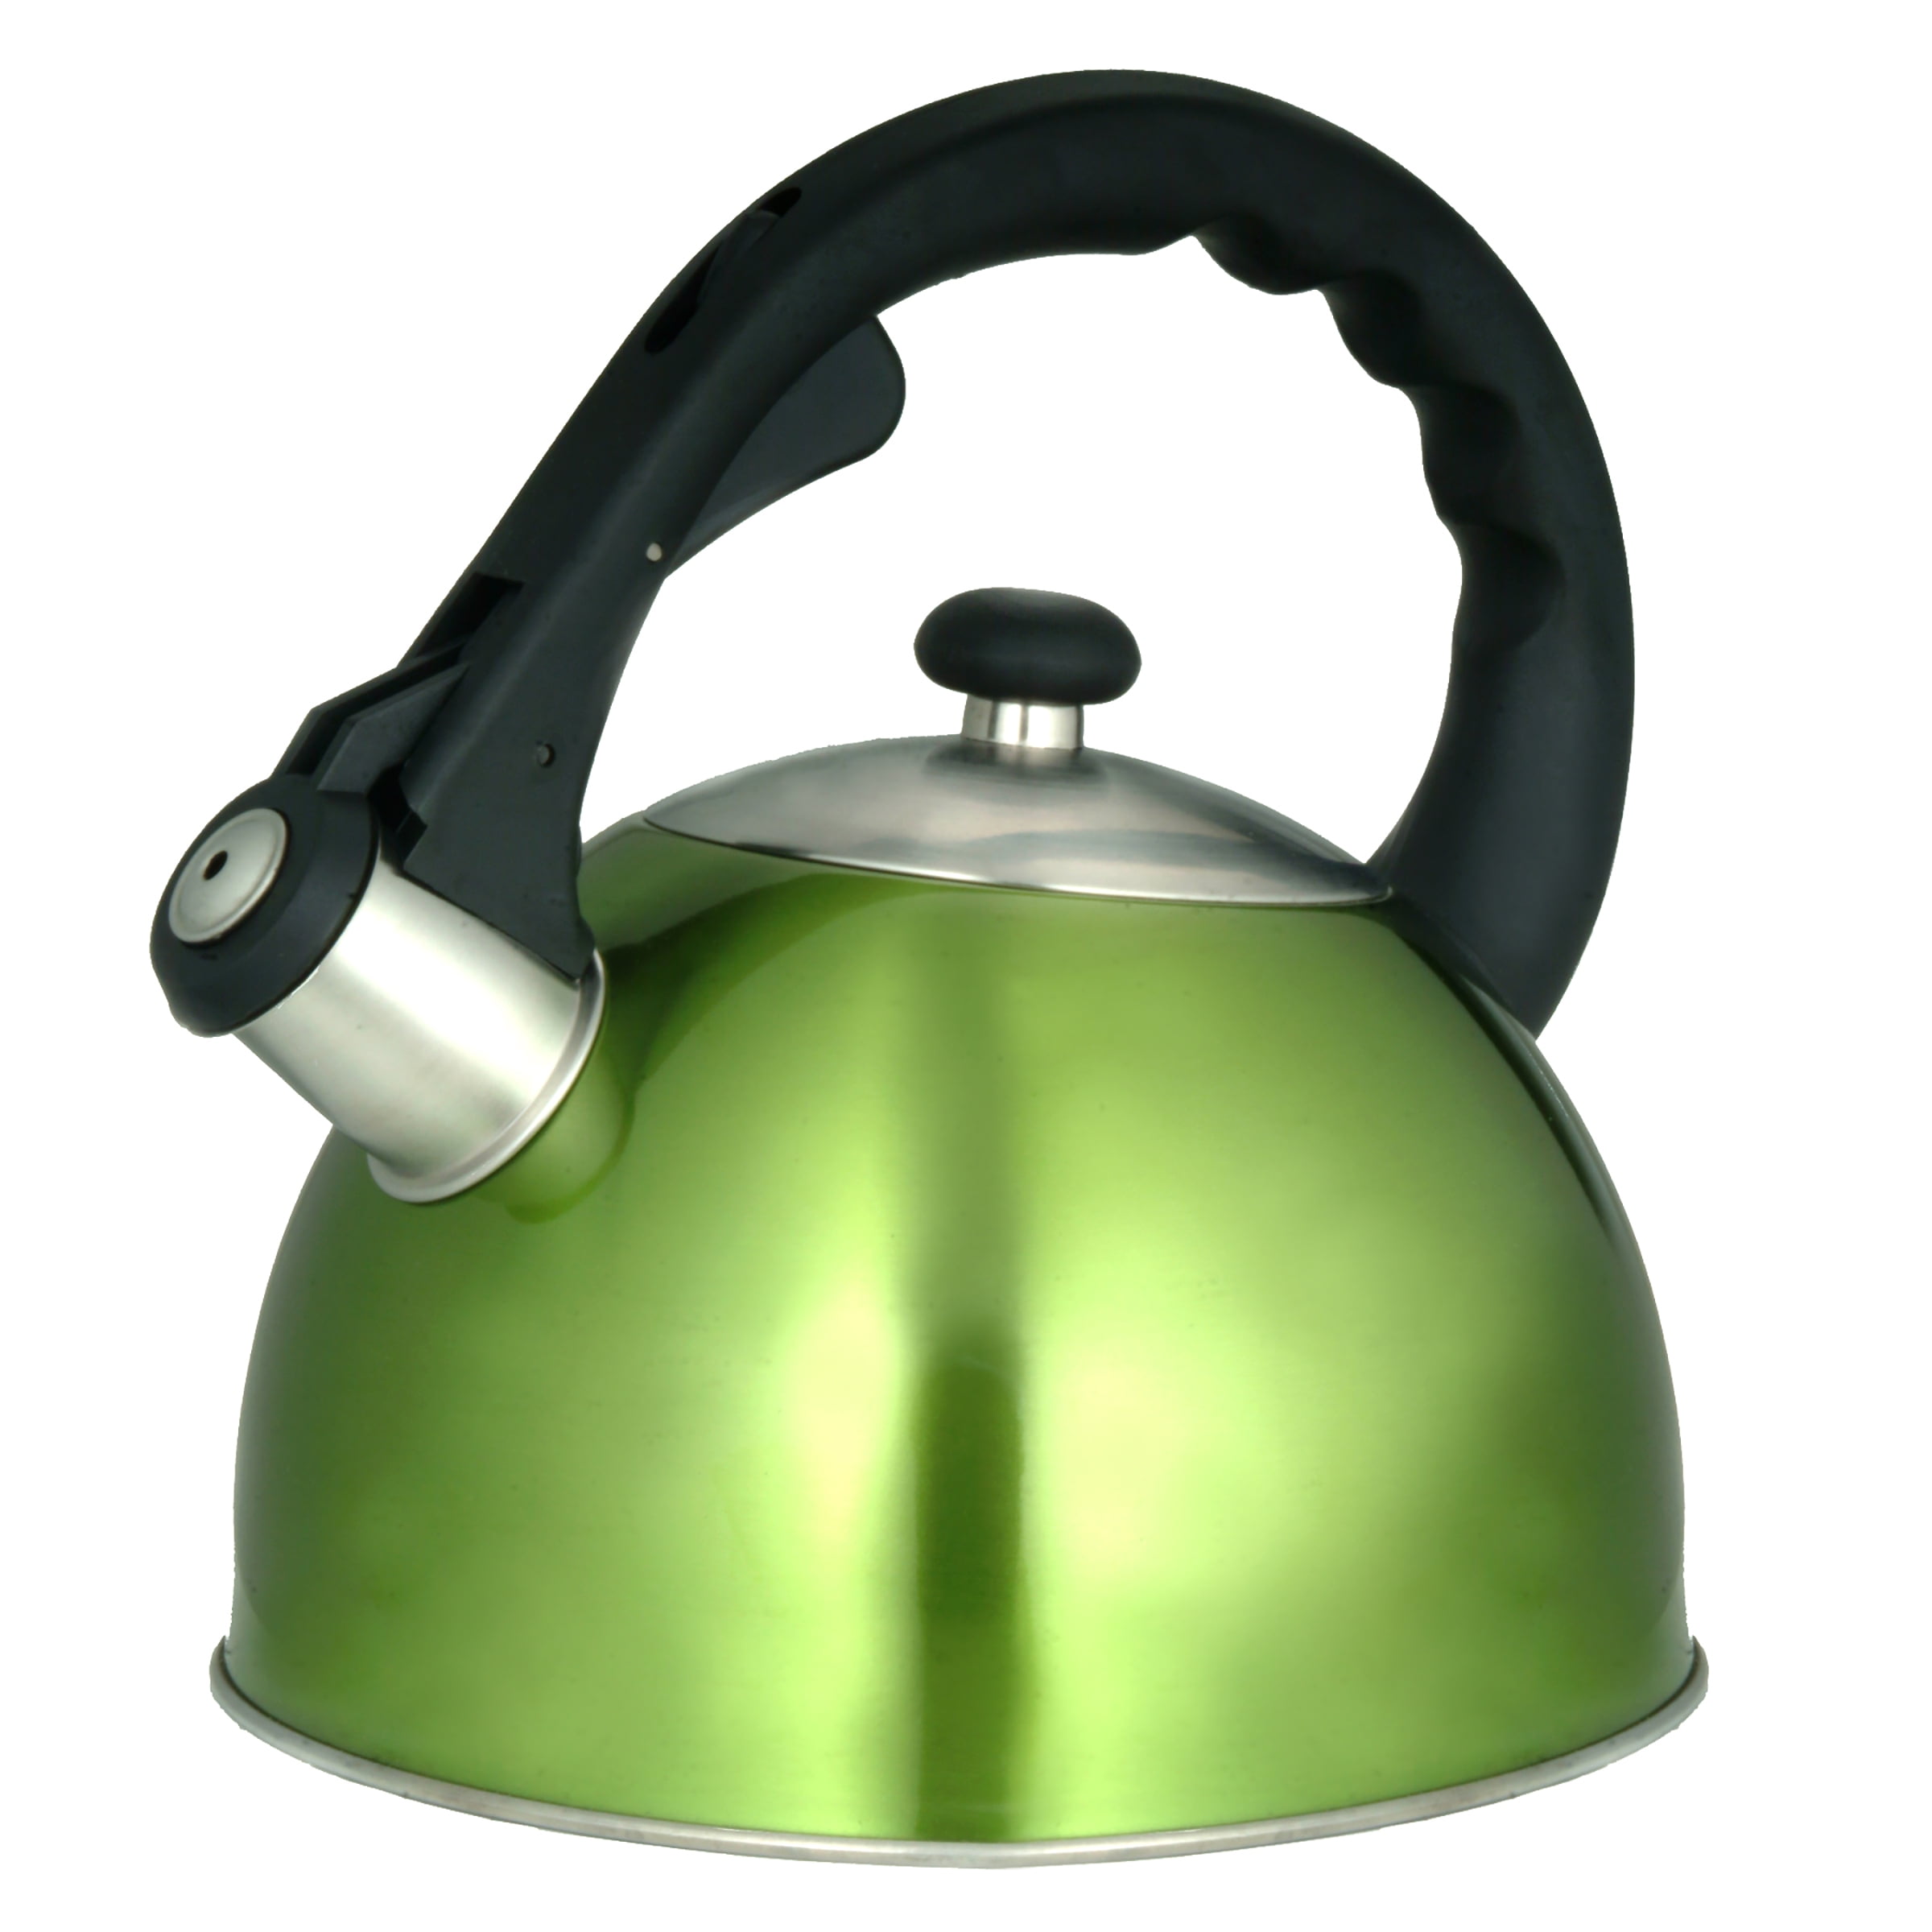 Creative Home 2.5 qt. Stainless Steel Whistling Tea Kettle Teapot with Aluminum Capsulated Bottom for Fast Boiling Heat Water, for Induction Stove Top